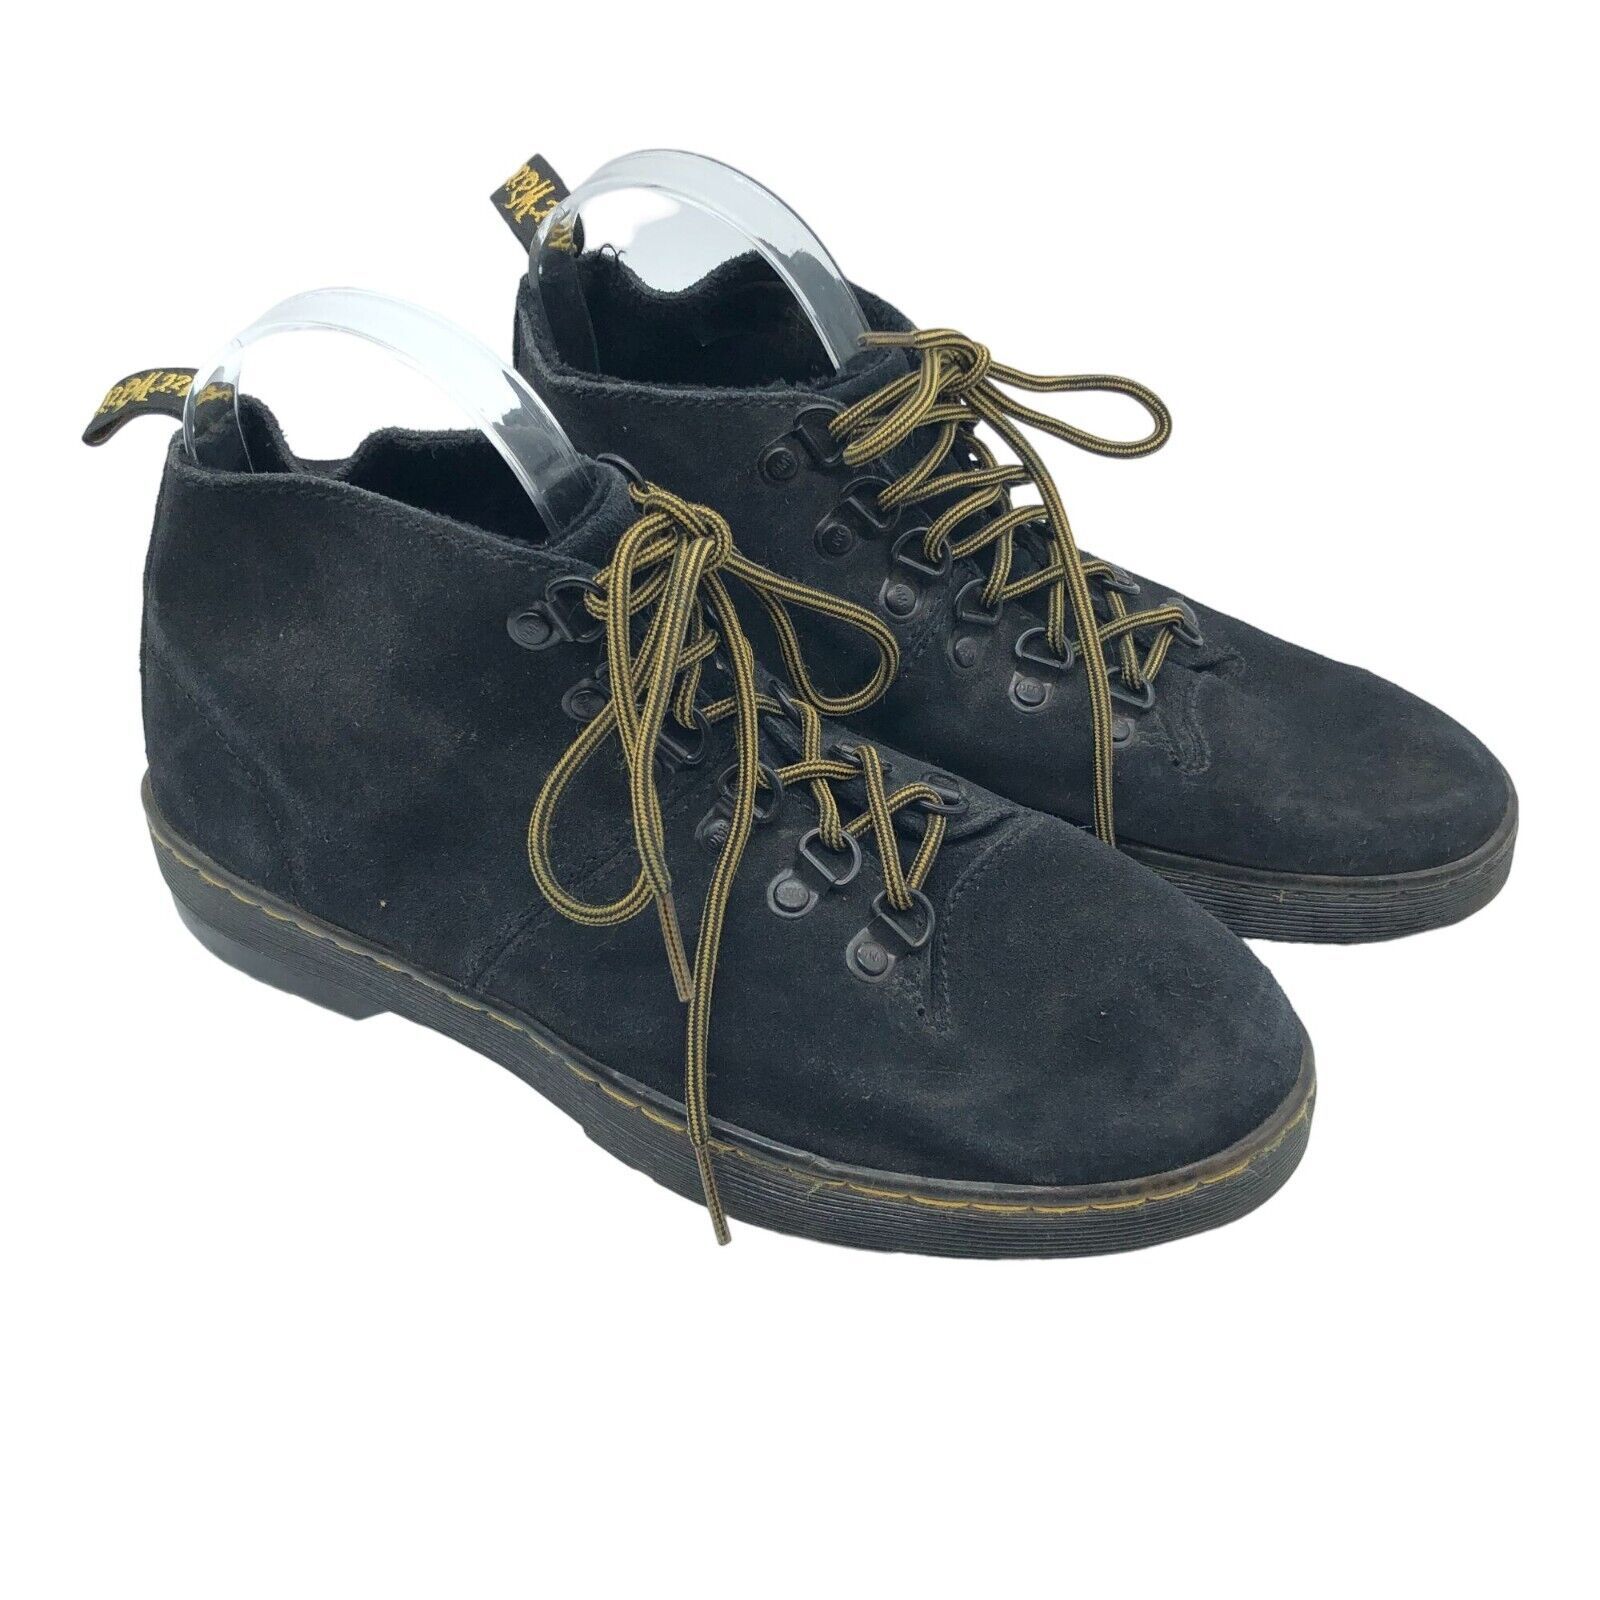 Primary image for Dr. Martens Lahava Chukka Boots Suede Leather Lace Up Black Womens 8